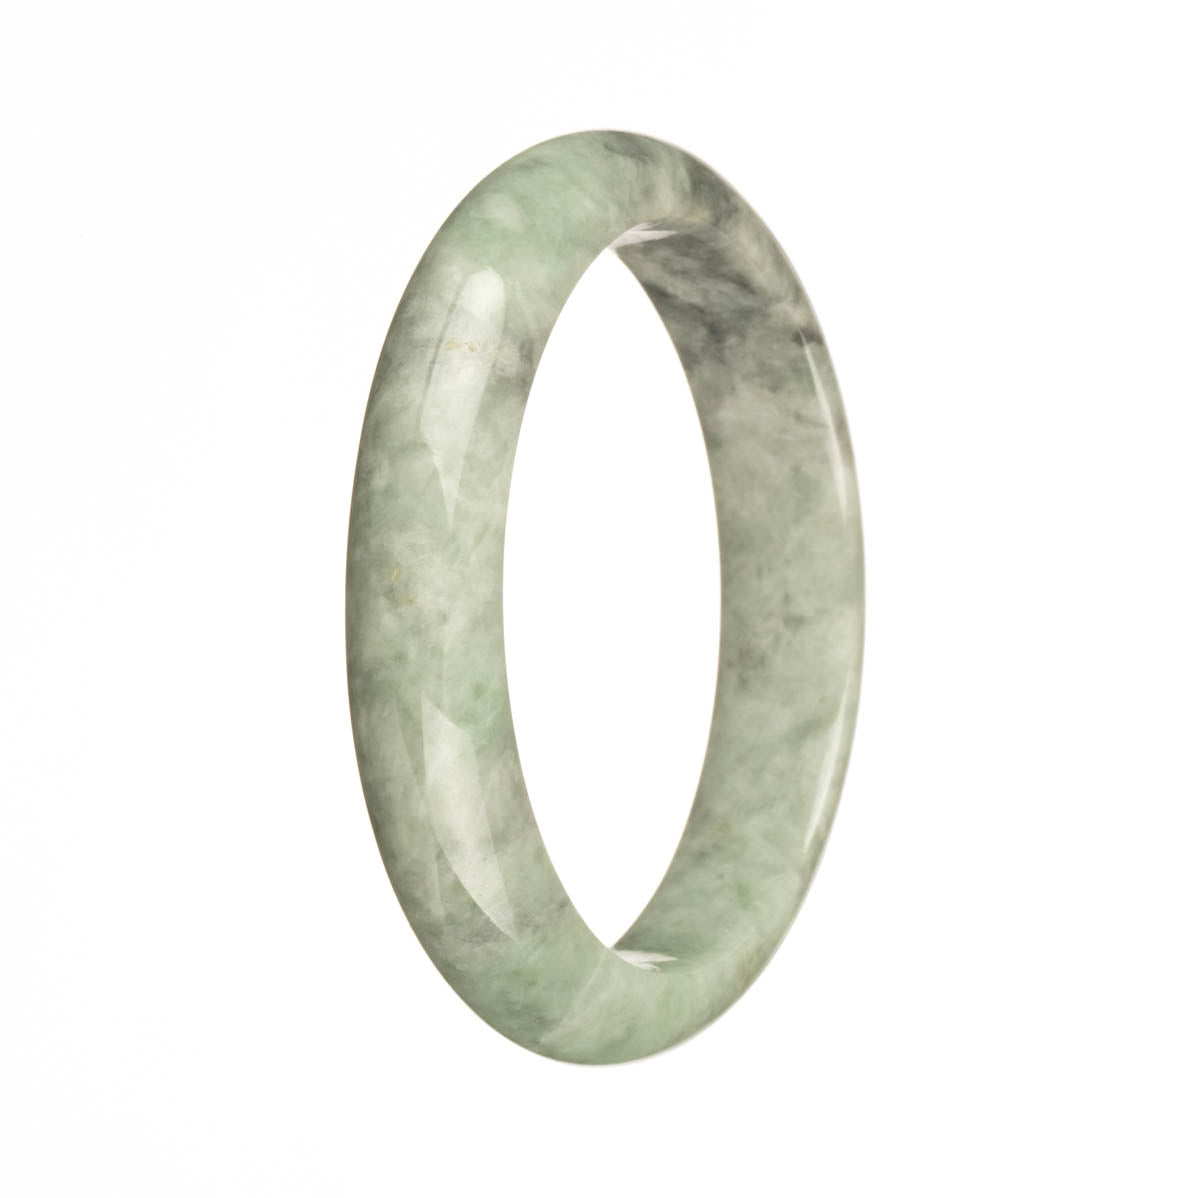 A close-up image of an exquisite jade bangle bracelet with green and grey patterns. The bracelet is made of Grade A authentic jadeite jade and features a 59mm half moon shape. Perfect for adding a touch of elegance to any outfit.